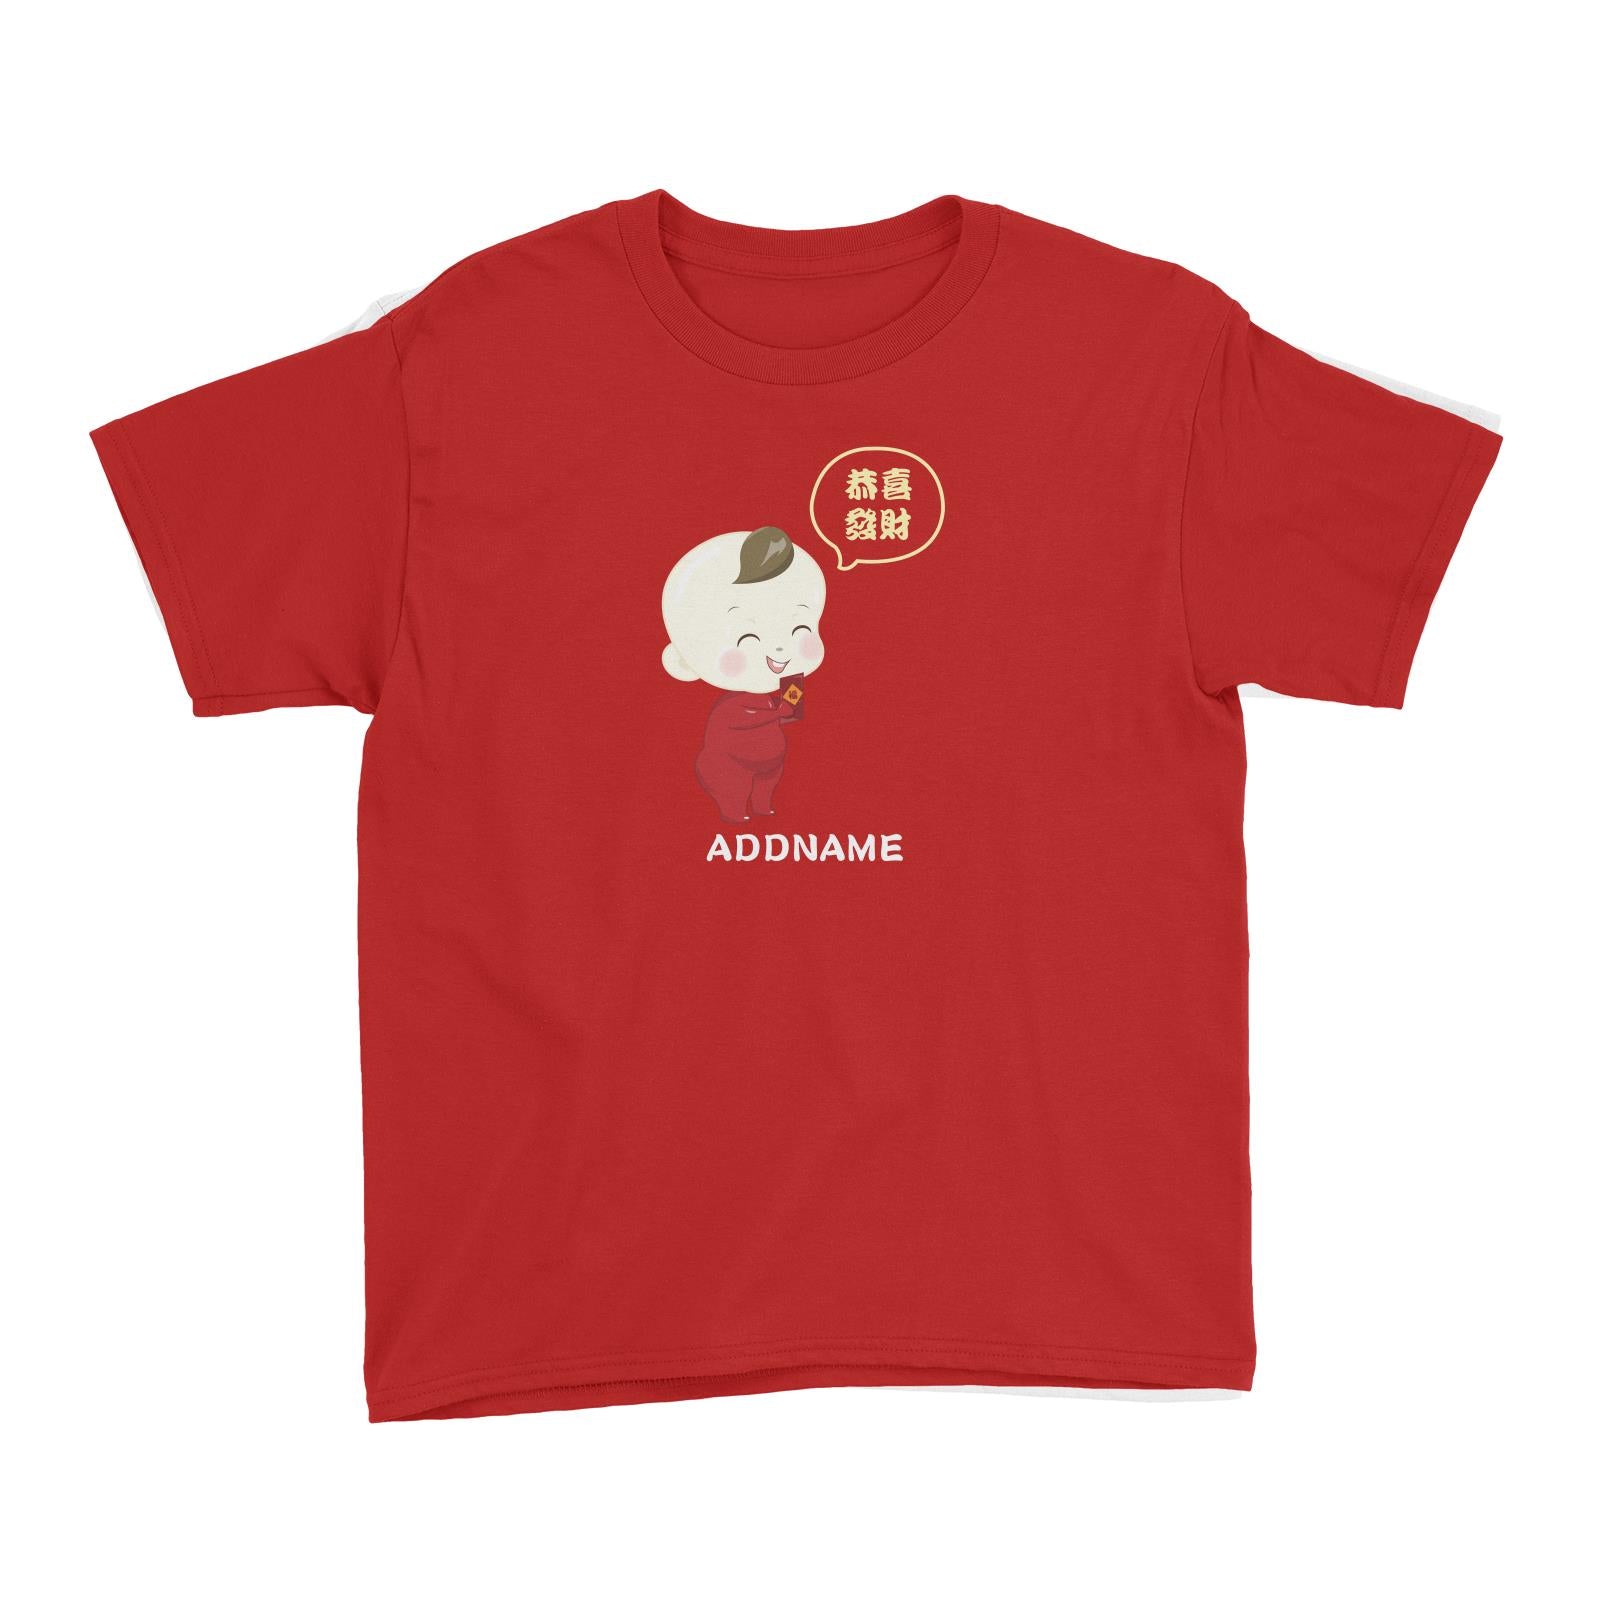 Chinese New Year Family Gong Xi Fai Cai Baby Boy Addname Kid's T-Shirt